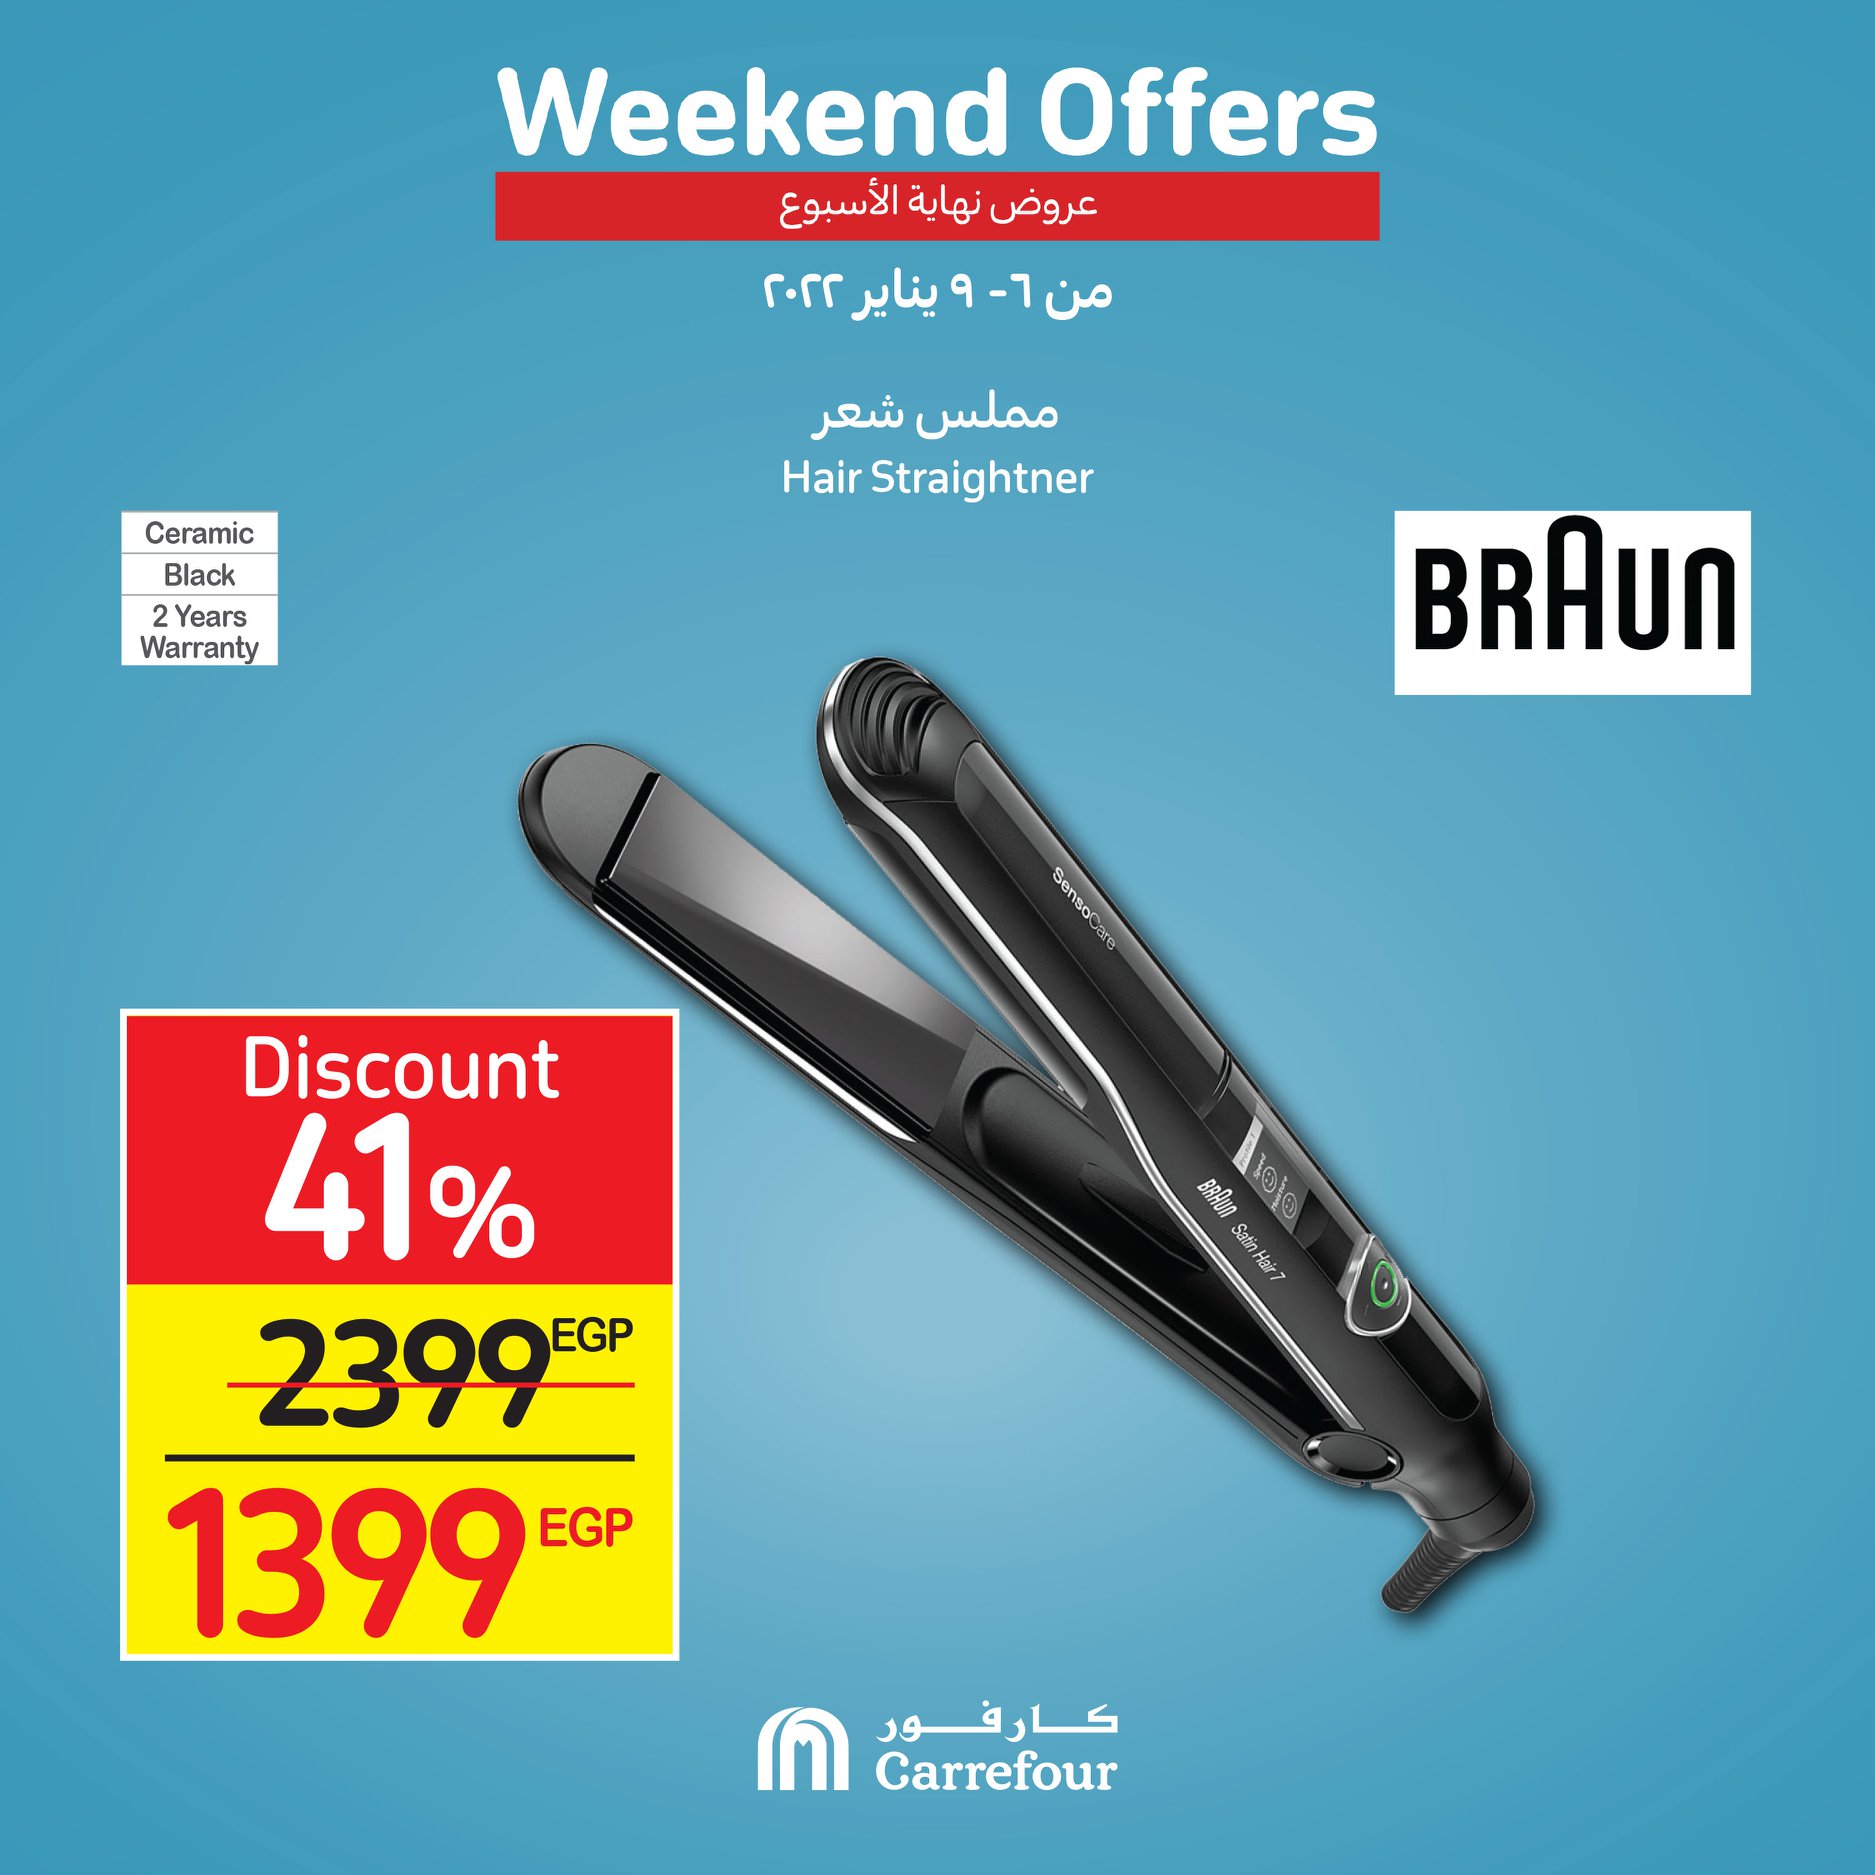 Now, the strongest offers and surprises from Carrefour, half-price discounts, at Weekend until January 16, 20